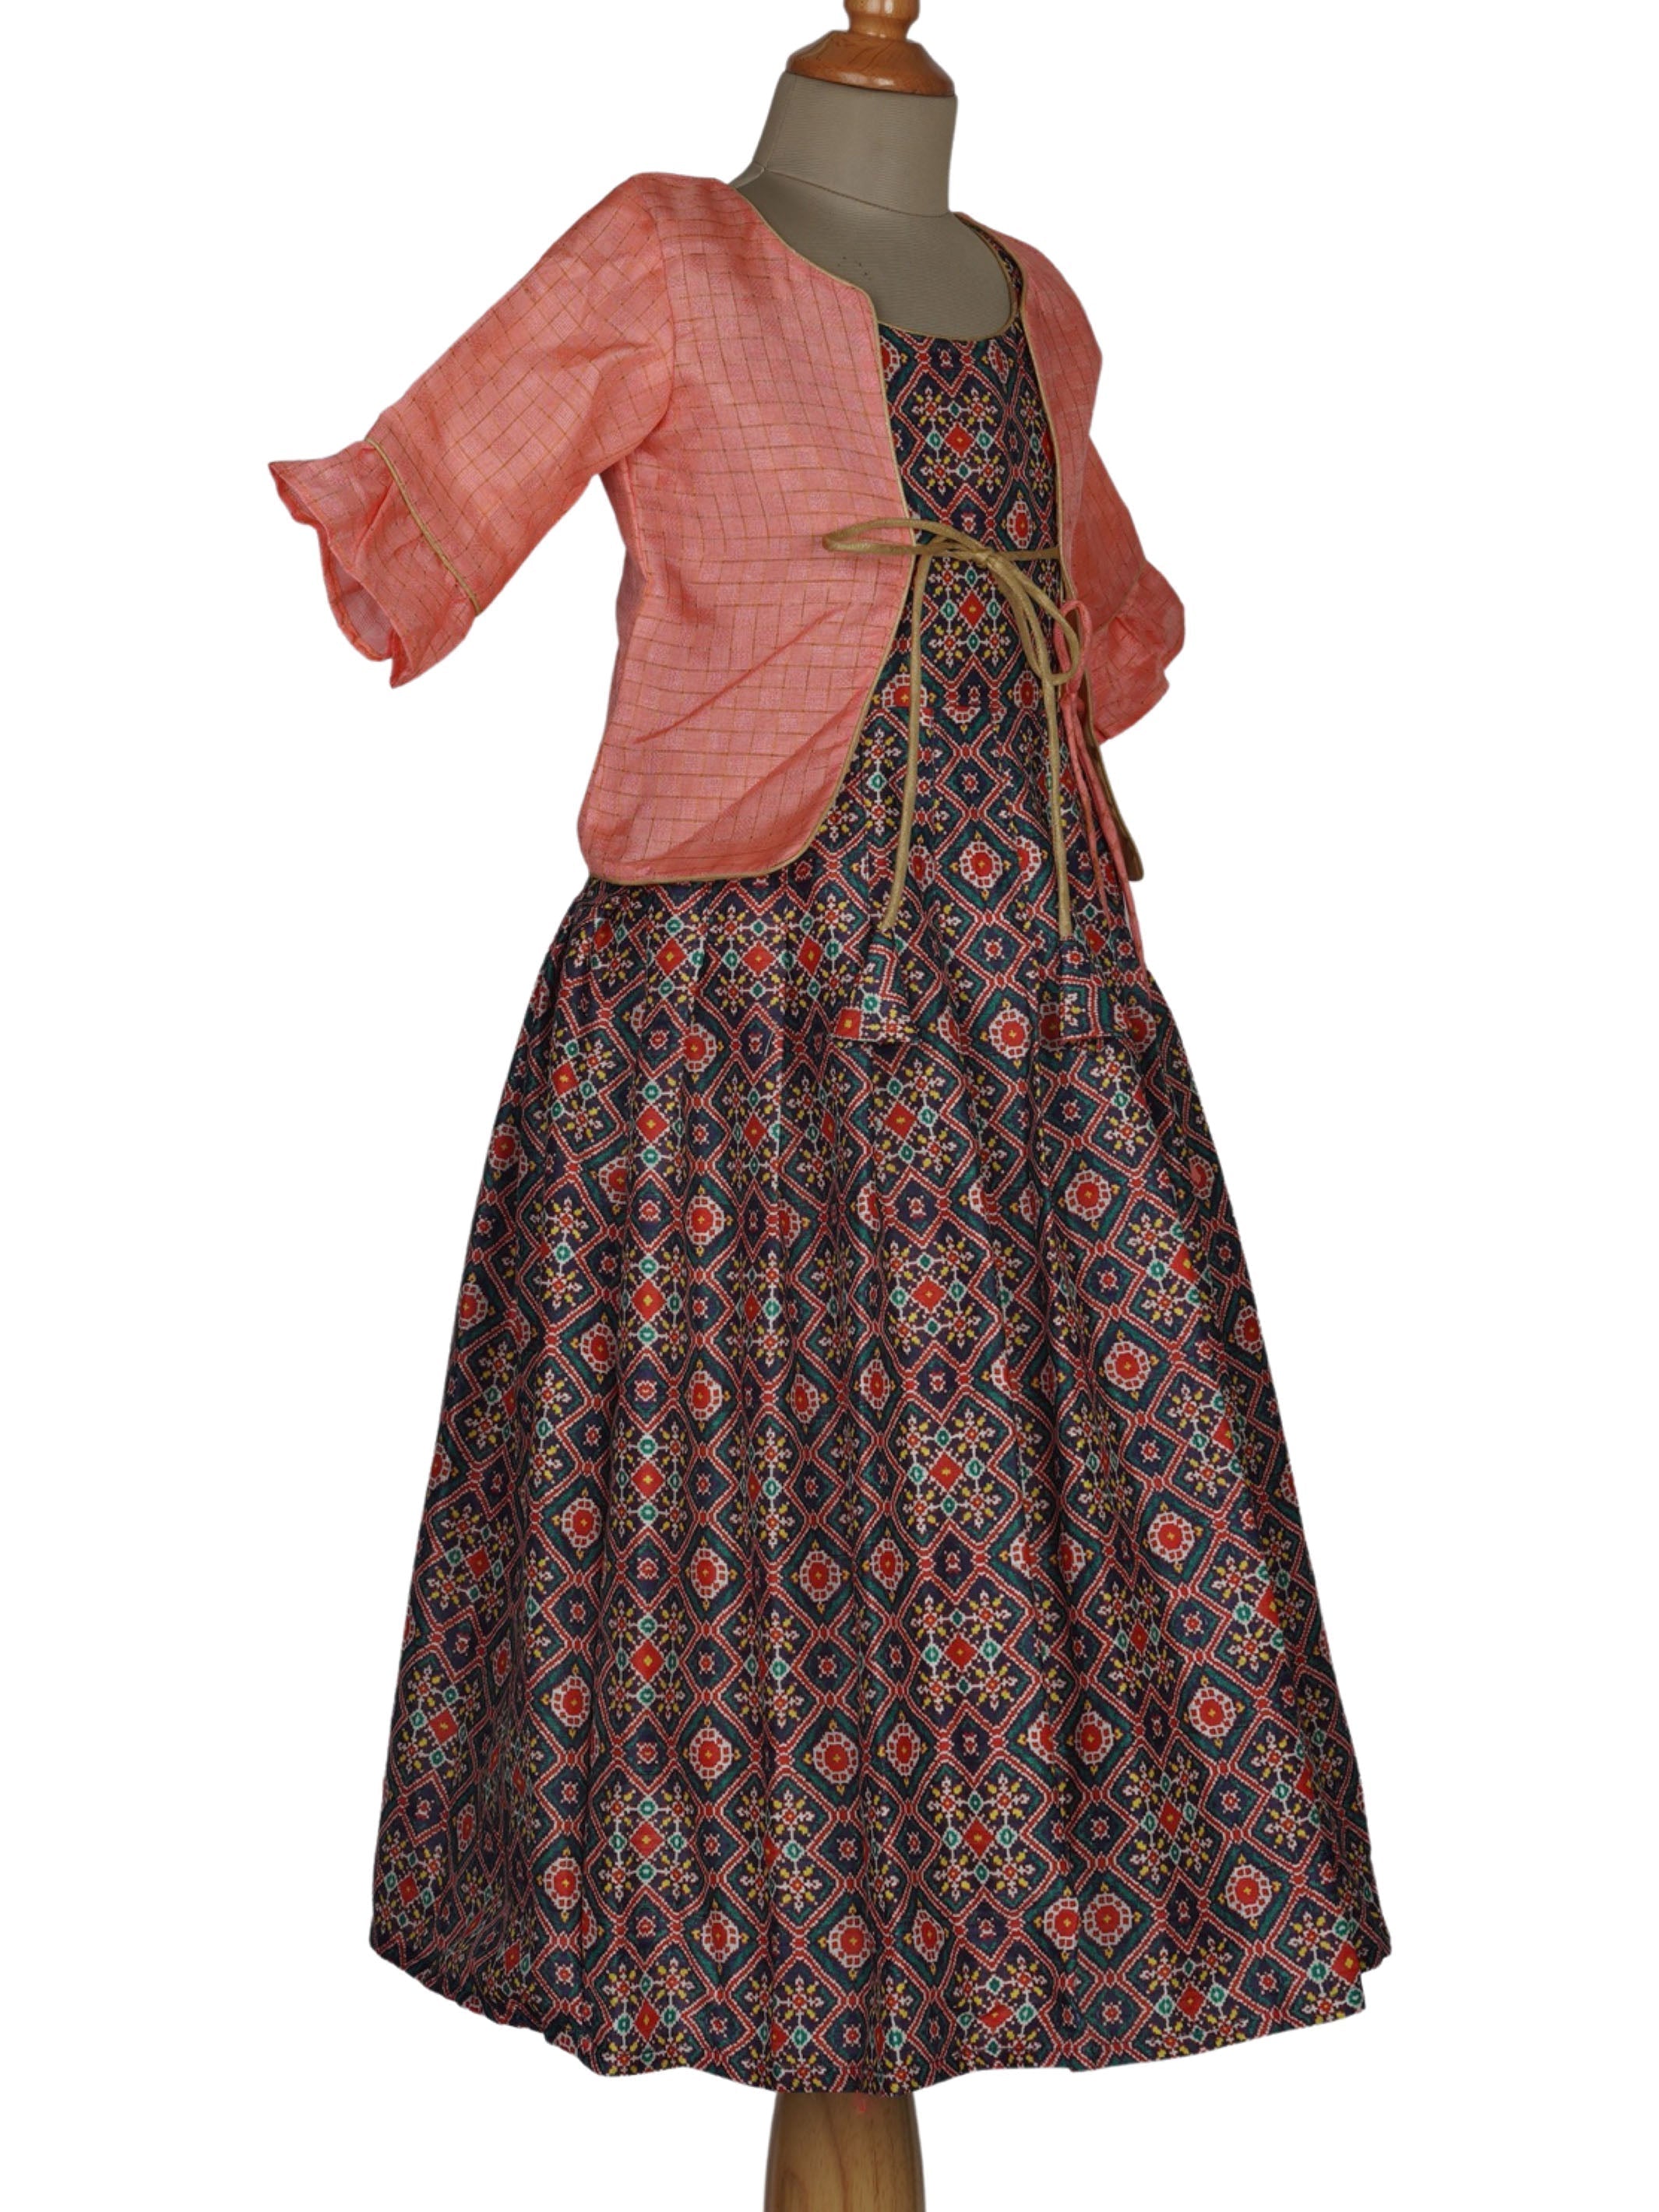 Gorgeous Printed Cotton Frock Dress Gown With Crosia Design Jacket - Etsy  New Zealand